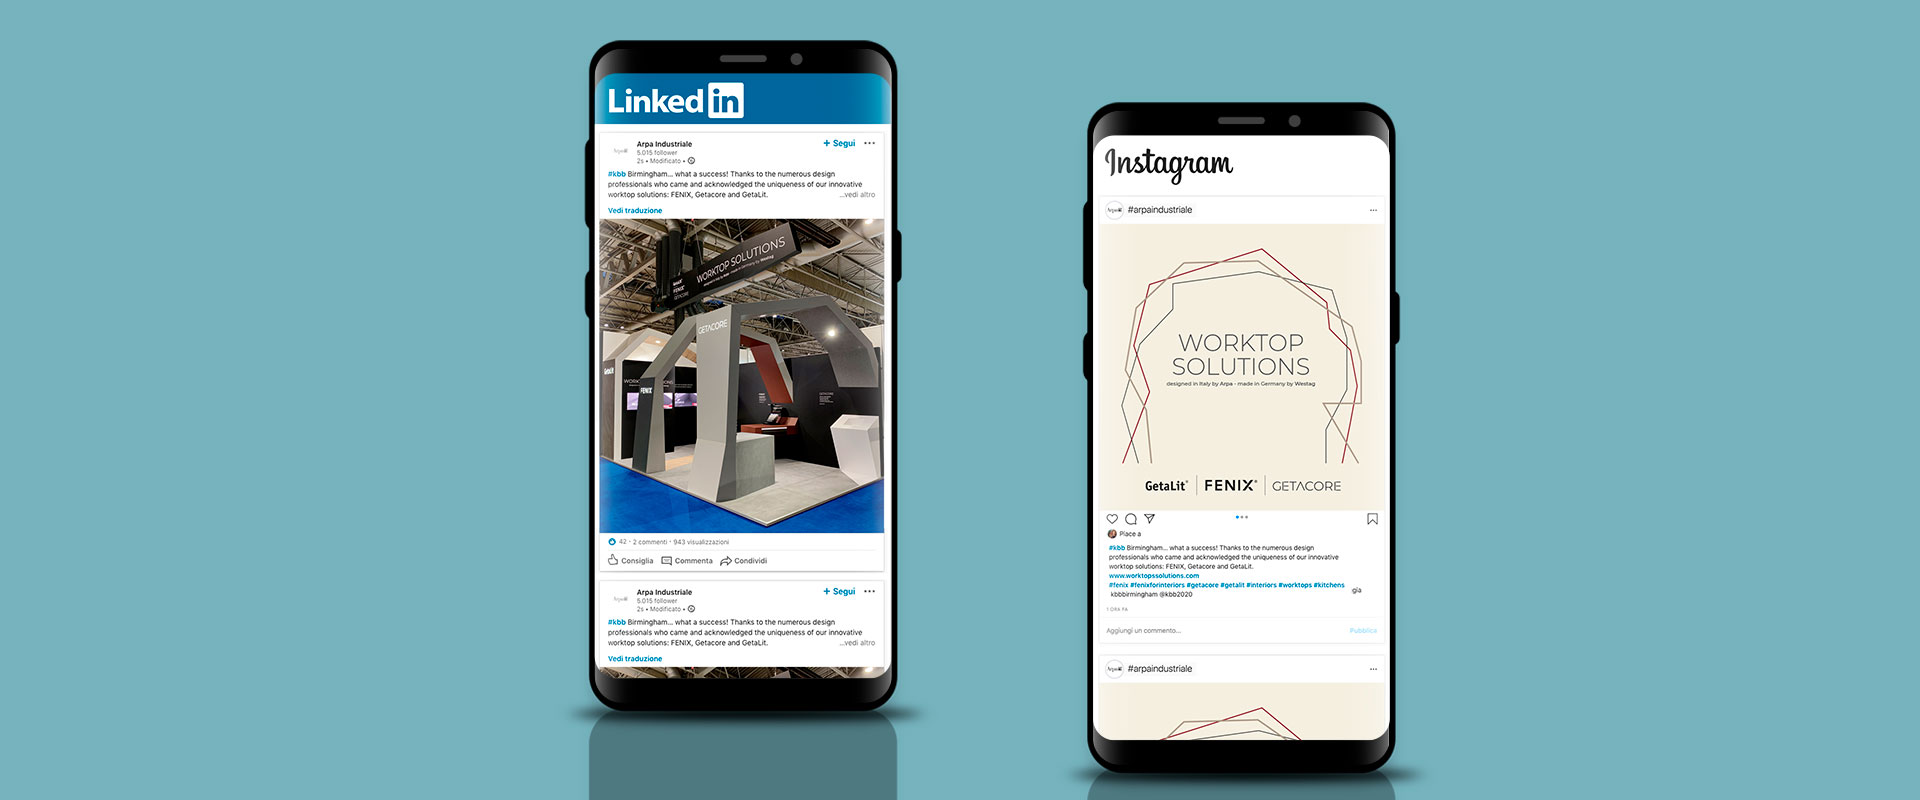 LinkedIn social campaign to launch the new Worktop Solutions project